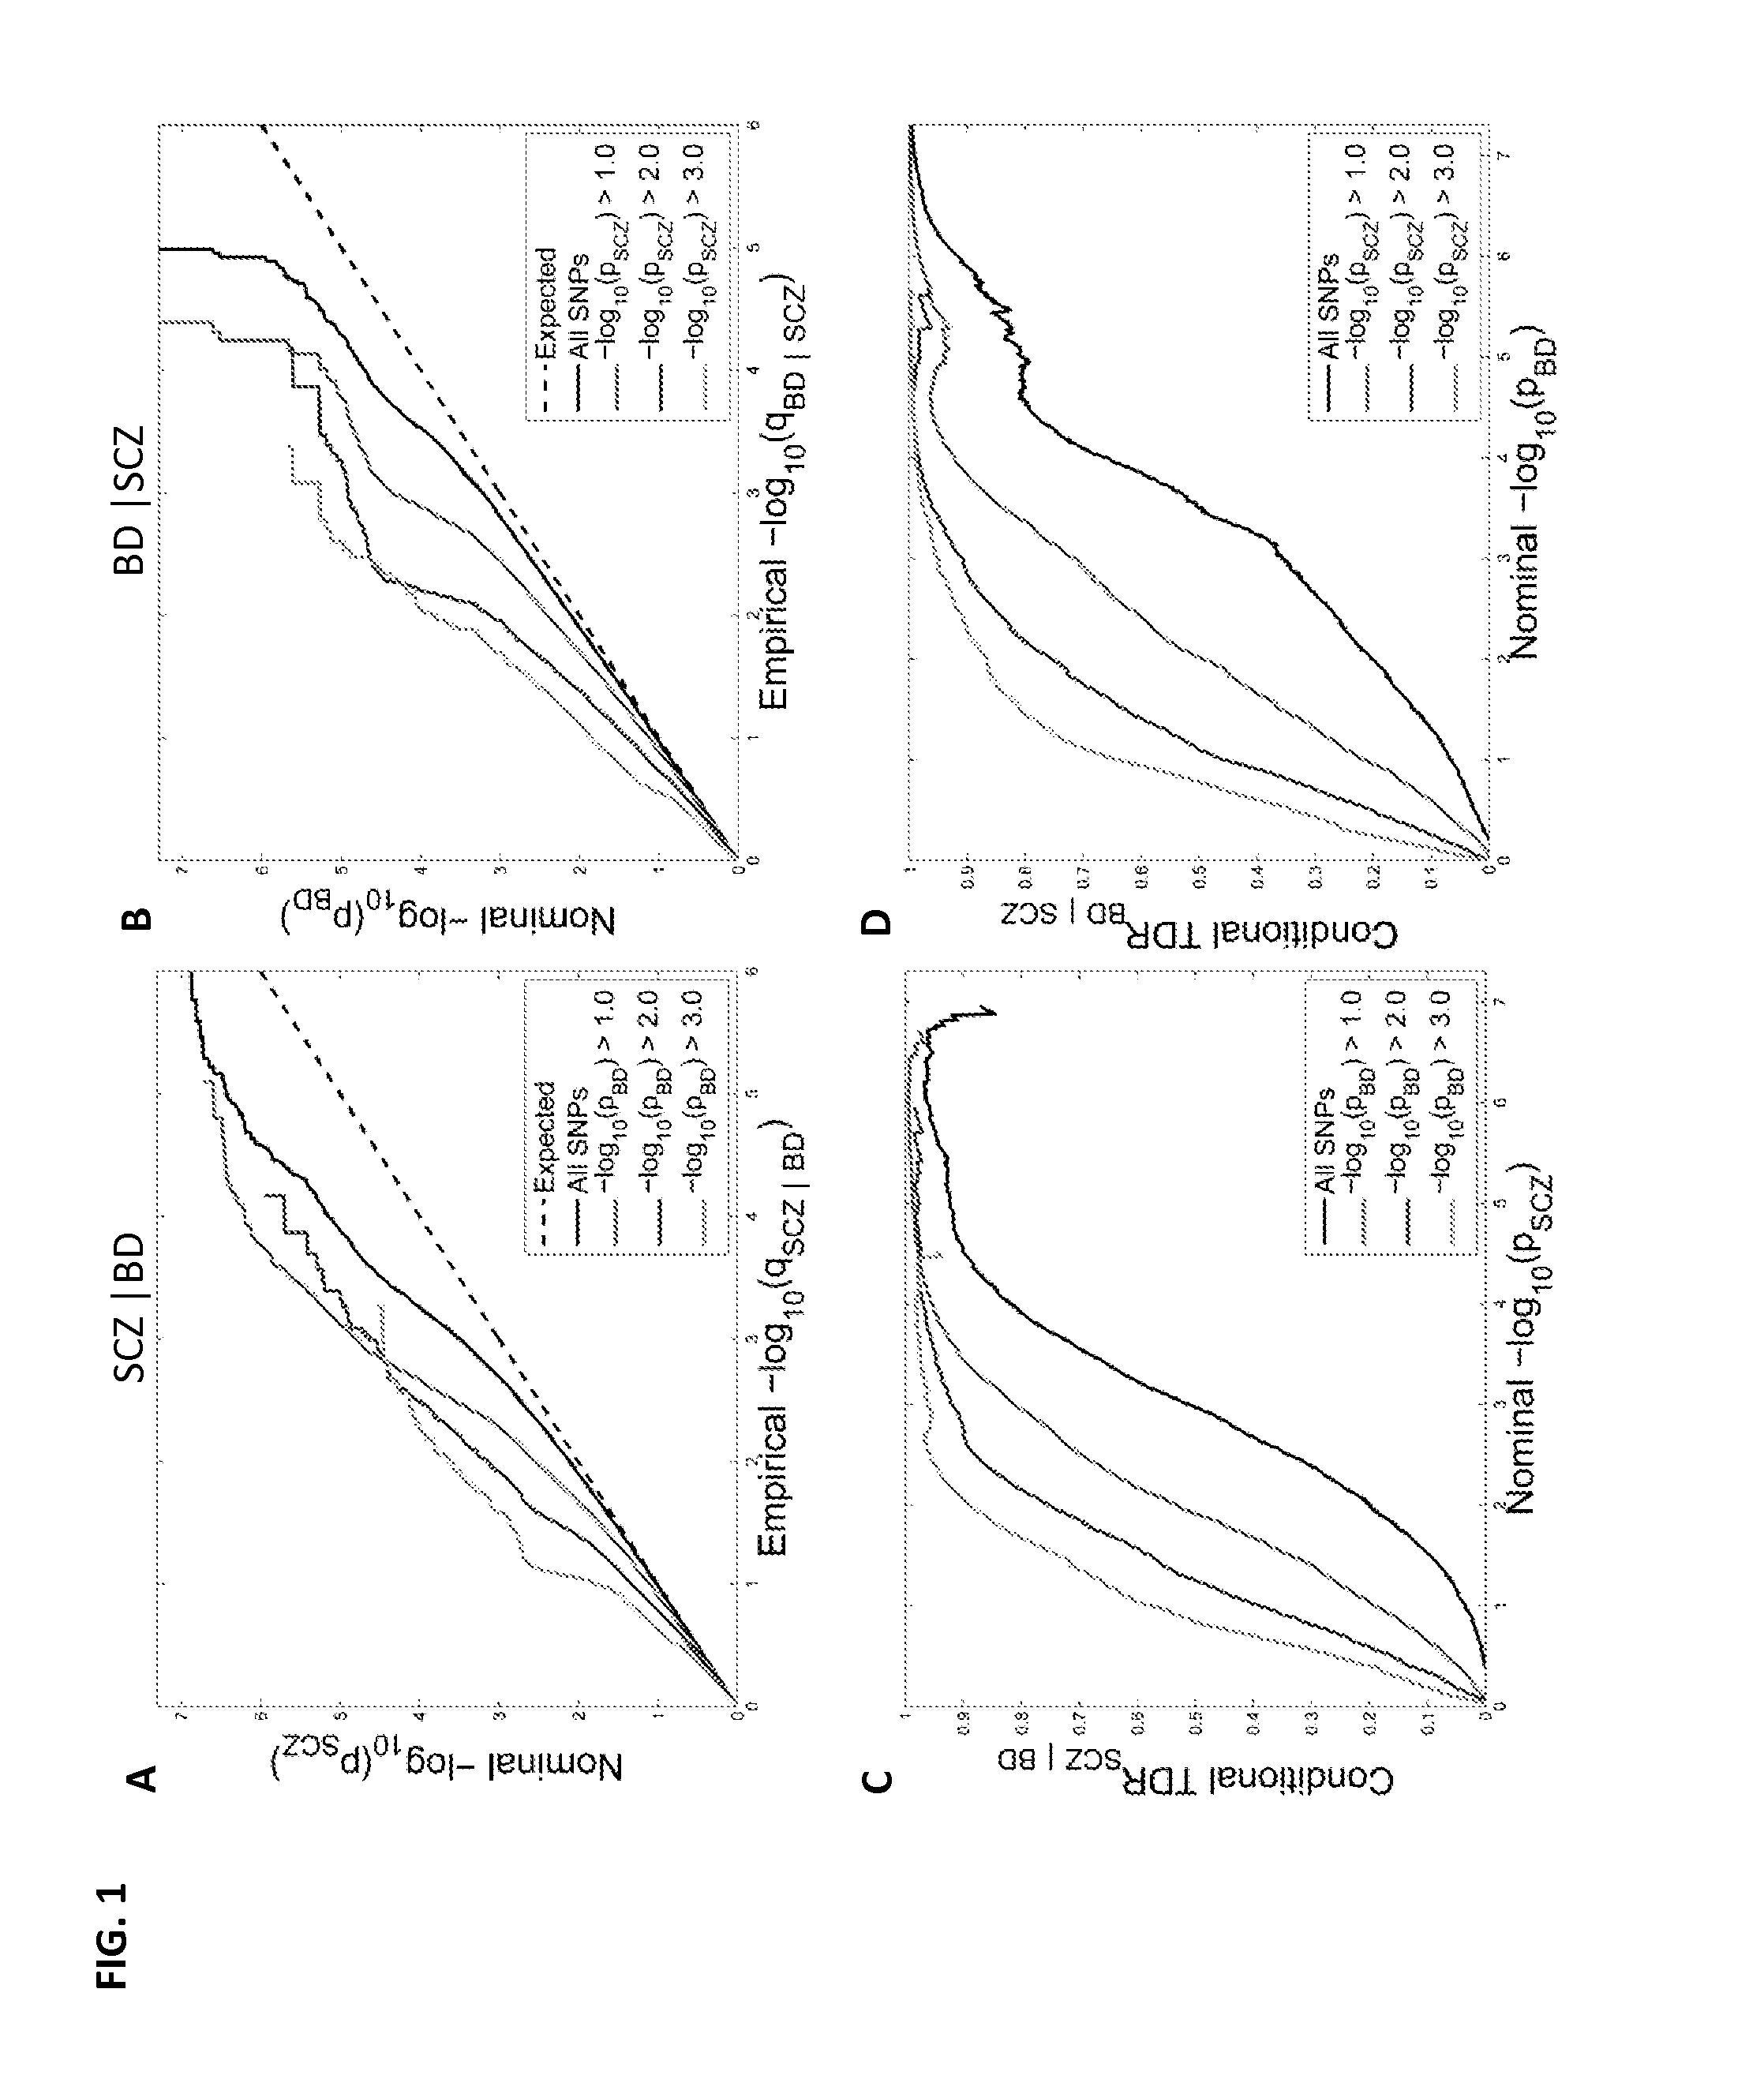 Systems and methods for identifying polymorphisms